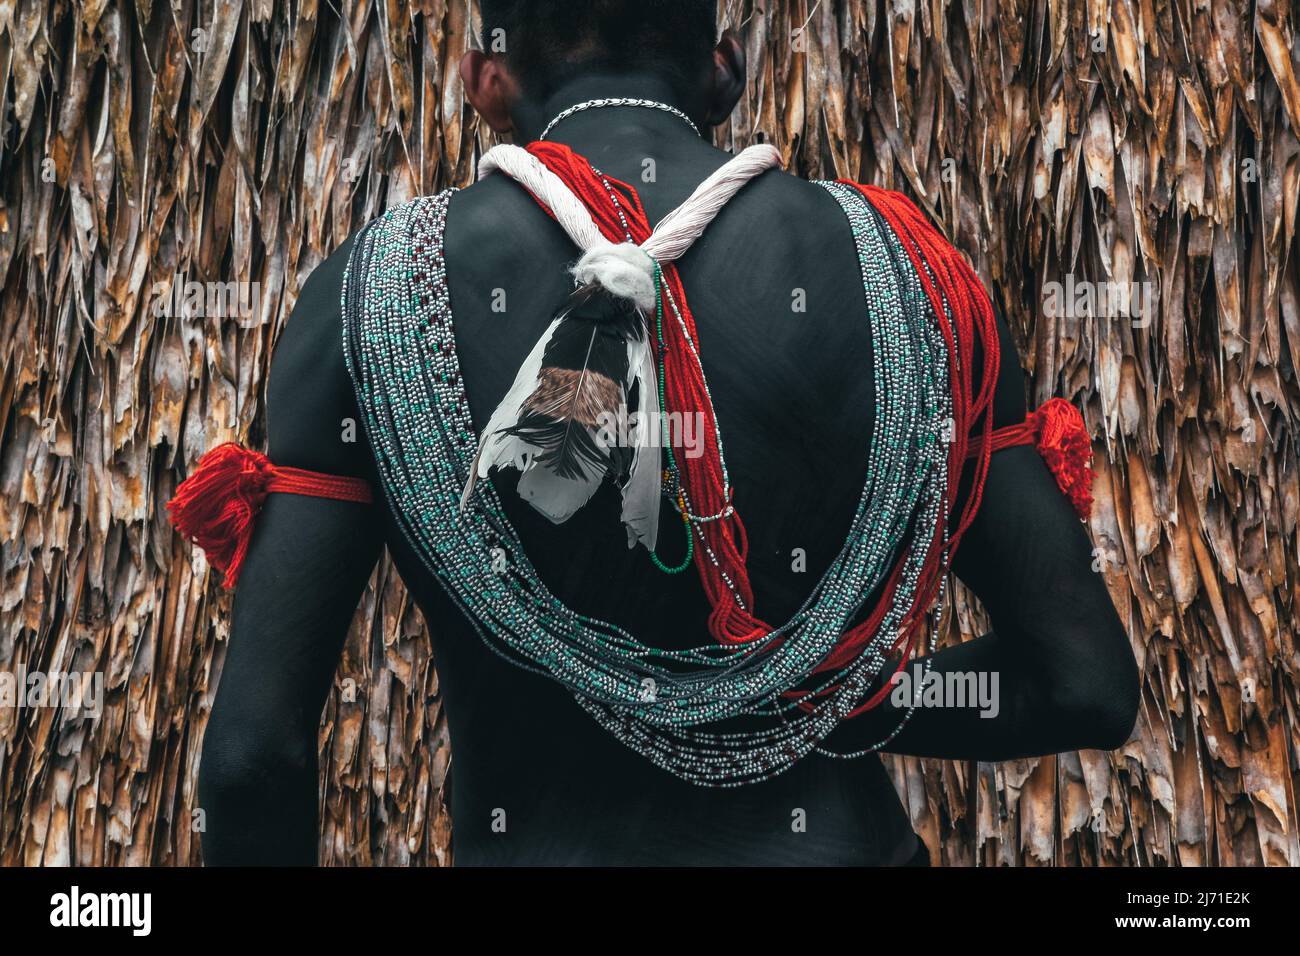 Detail of adornment or jewellery on the  back of an indian man from a Brazilian Amazon tribe,  taking part in the Indigenous Games. 2010. Stock Photo